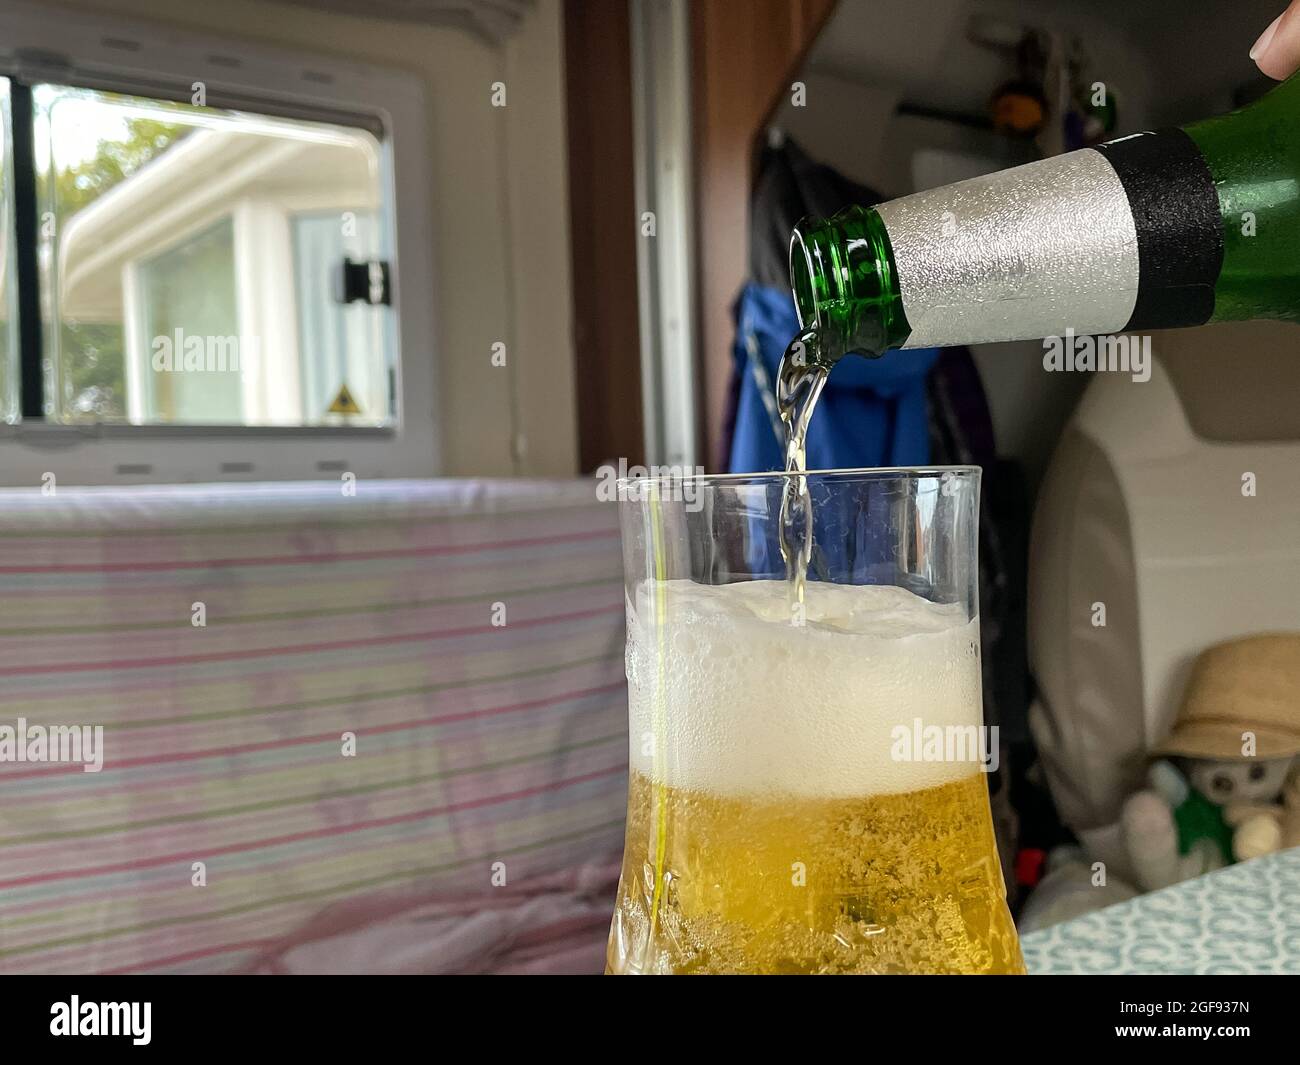 Close view of a green beer bottle with beer pouring into a glass.Lager and frothy head in glass.Interior in a motorhome with window in background Stock Photo